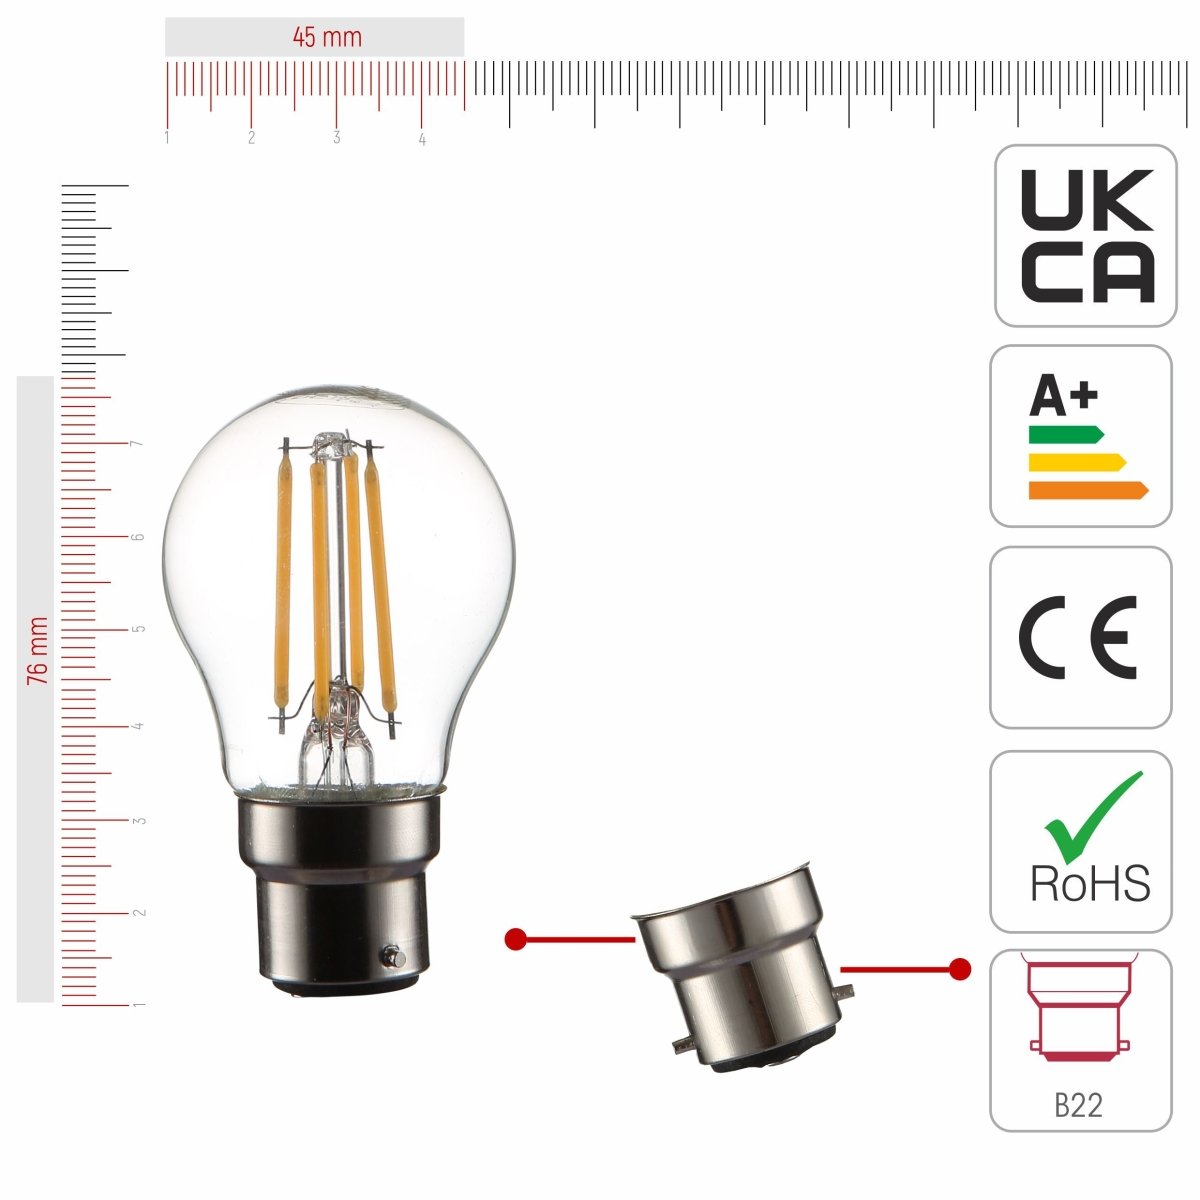 Size and certifications of LED Dimmable Filament Bulb G45 Golf Ball B22 Bayonet Cap 4W 470lm Warm White 2700K Clear Pack of 4 | TEKLED 583-150264